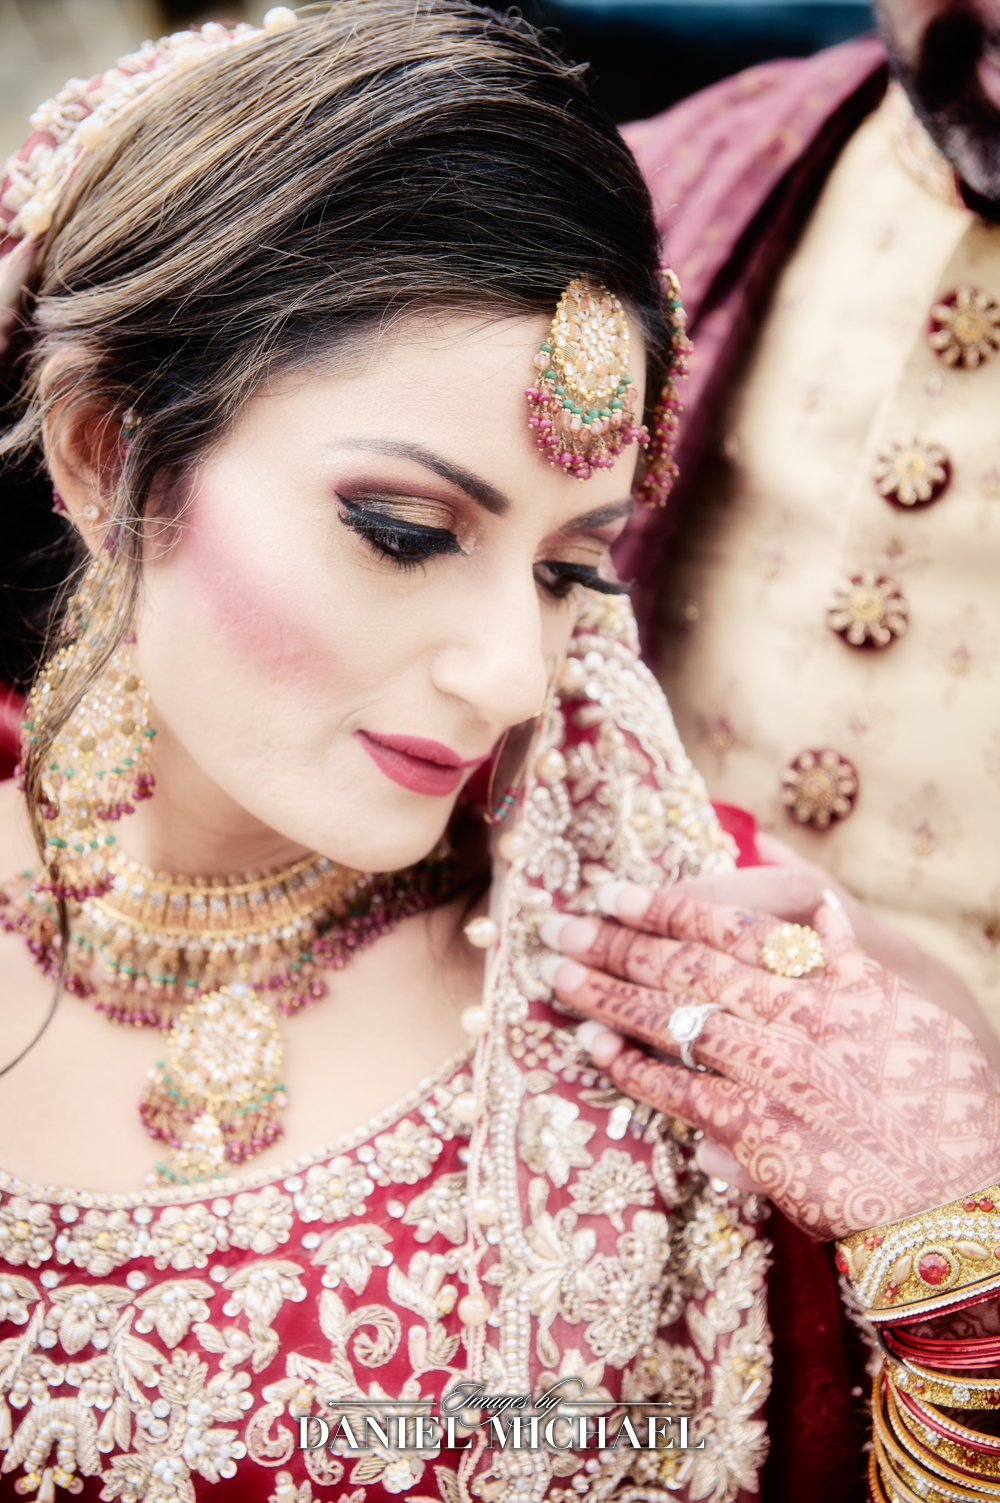 Elegant South Asian Muslim bride and groom dressed in traditional wedding outfits, with intricate gold jewelry and henna designs